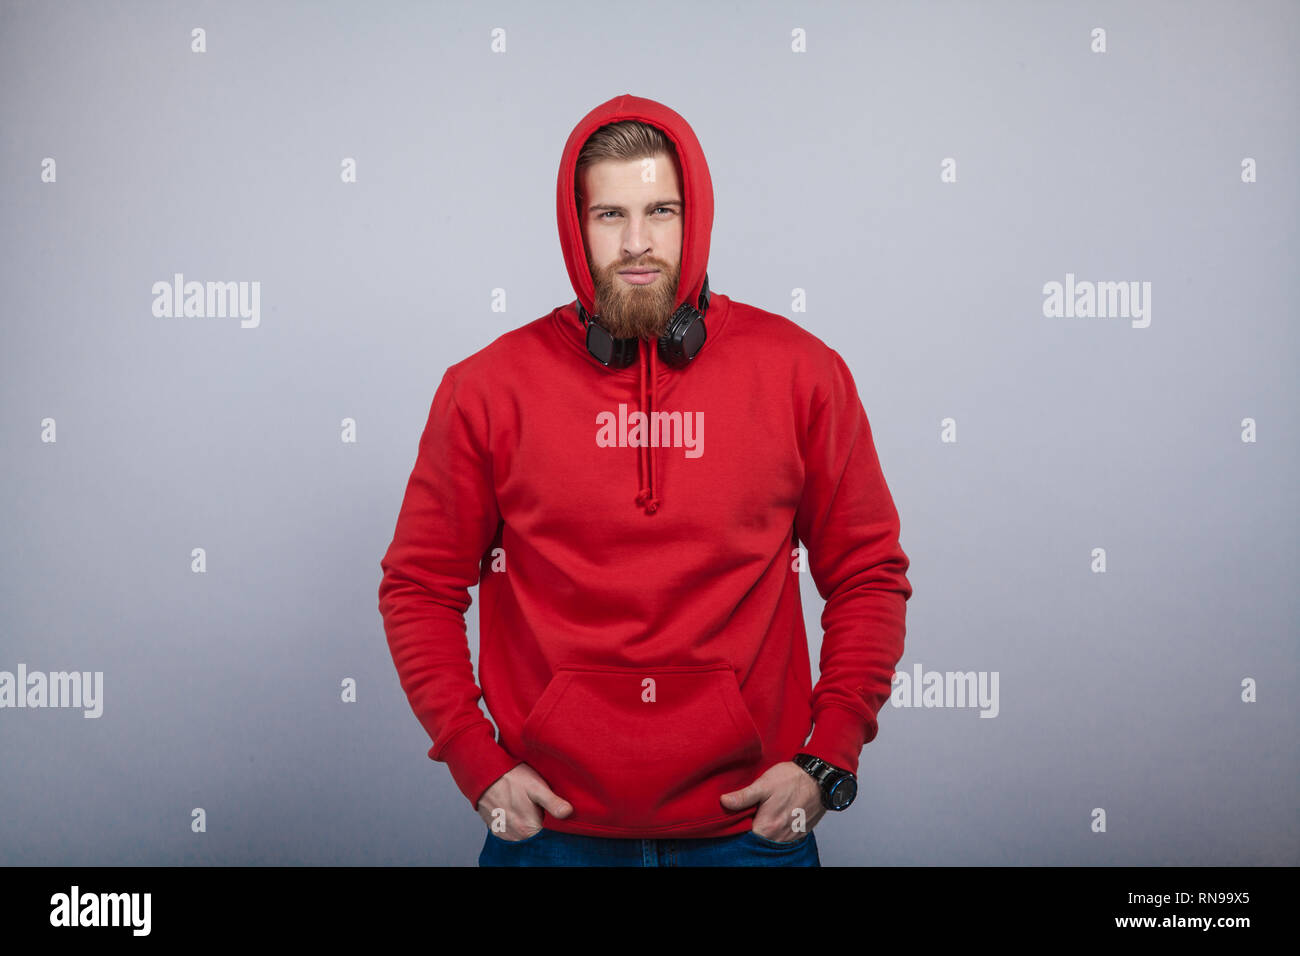 young handsome man with the beard wearing red sweatshirt with hood on and headphones on his neck standing at the grey background looking to the camera Stock Photo